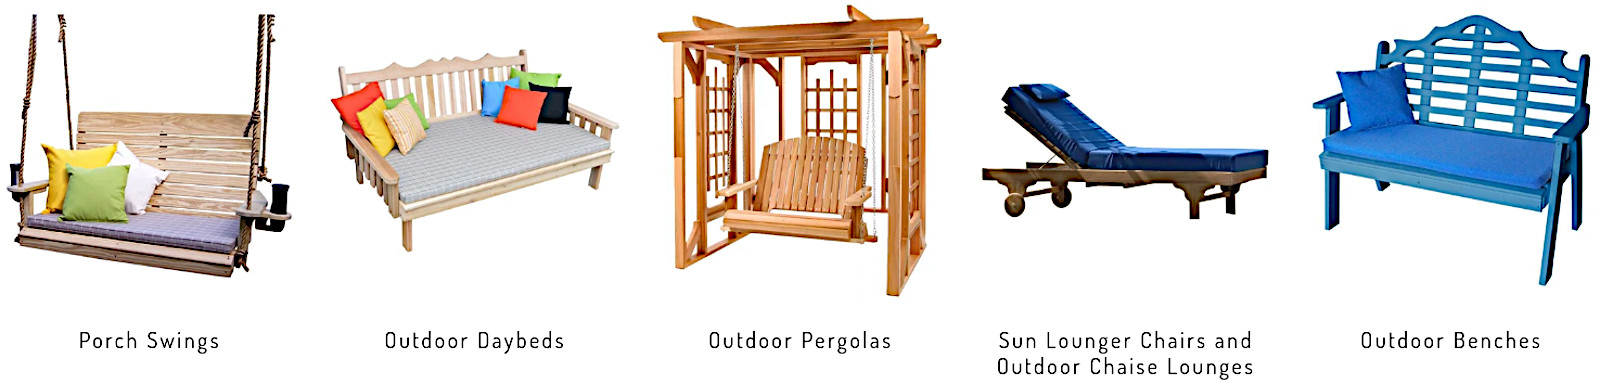 Special Offer outdoor furniture